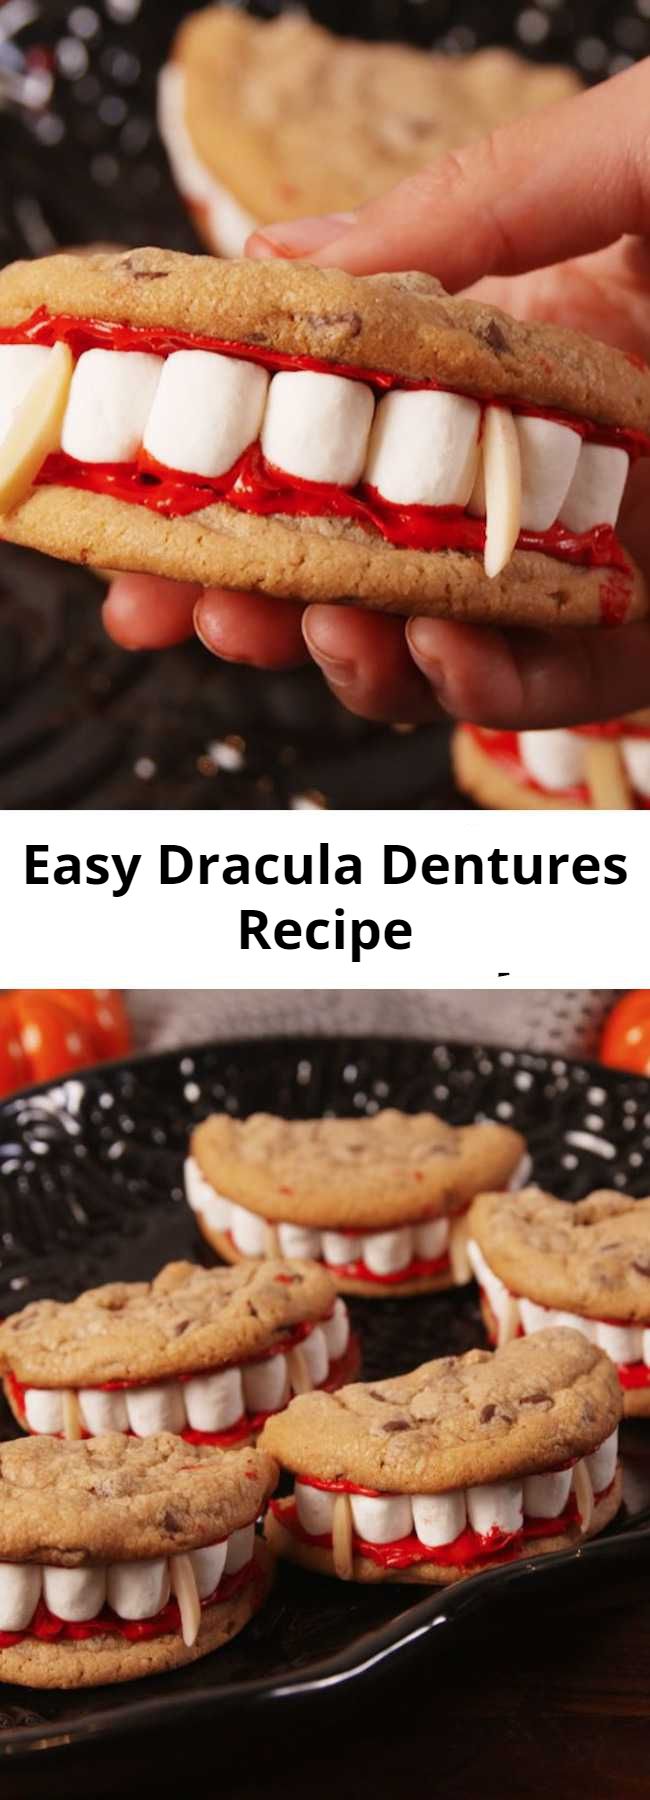 Easy Dracula Dentures Recipe - The only tasty dentures. Look at those marshmallowy whites.